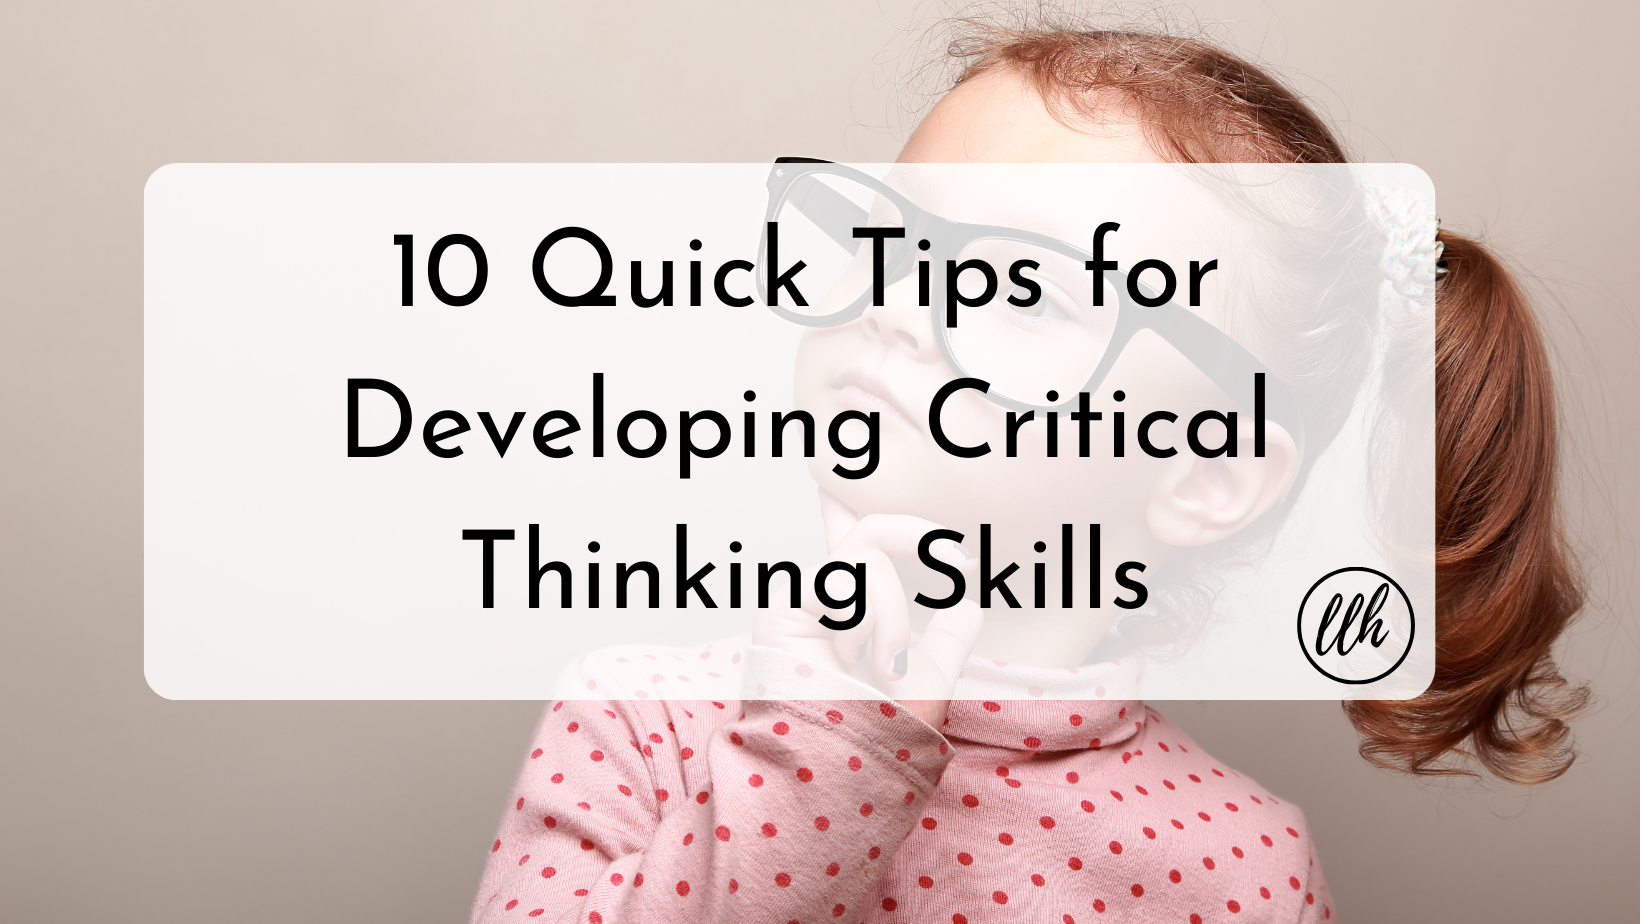 10 Quick Tips for Developing Critical Thinking Skills